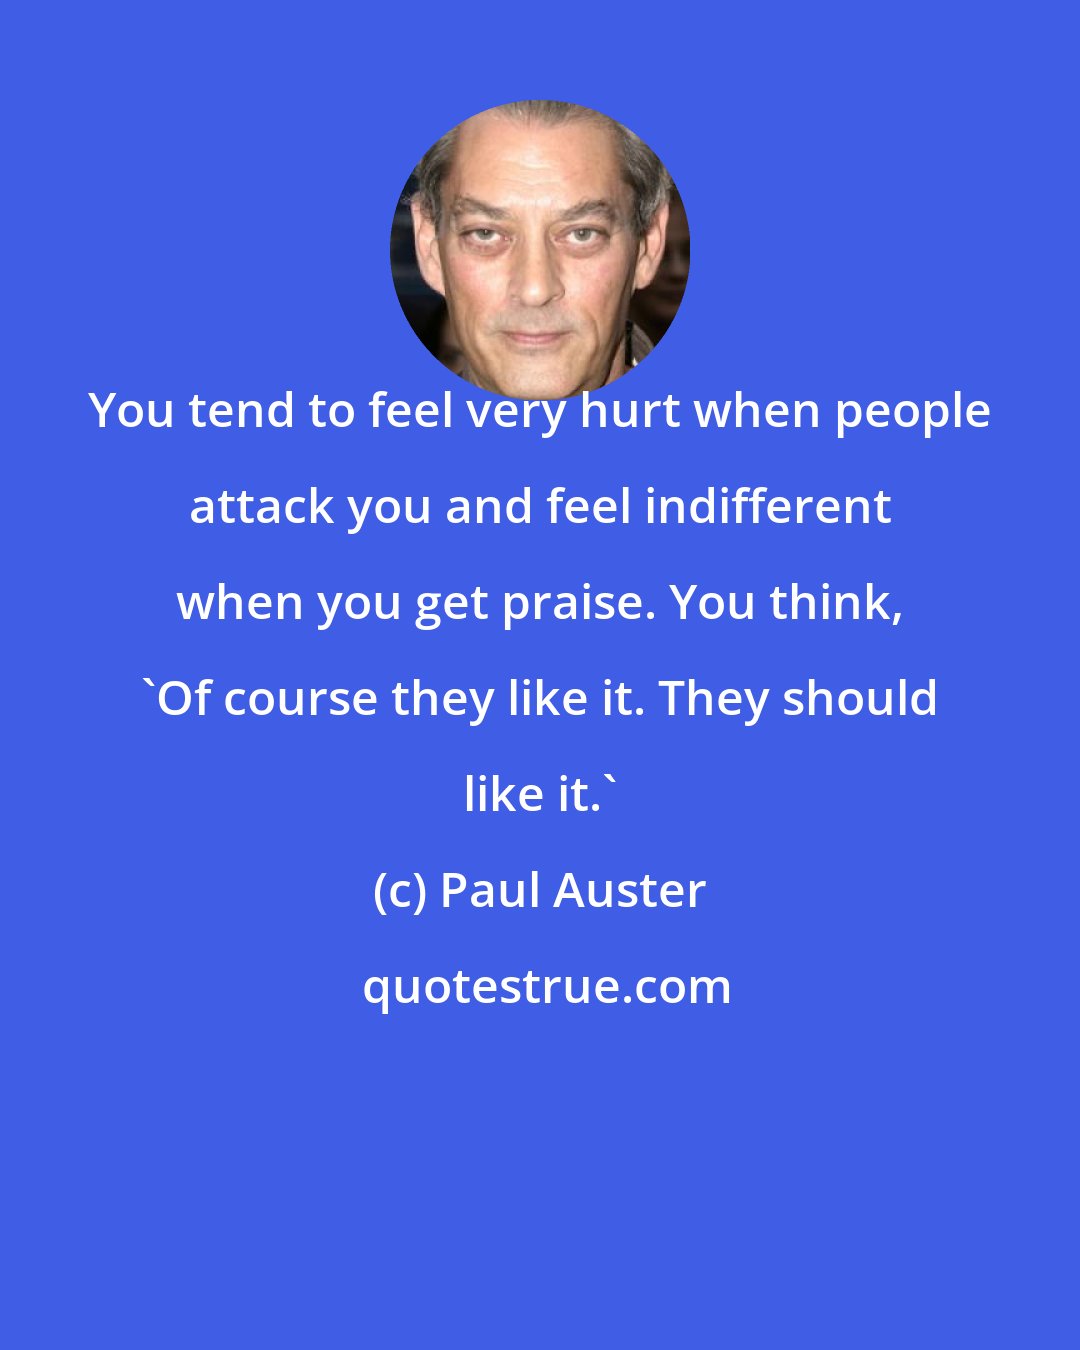 Paul Auster: You tend to feel very hurt when people attack you and feel indifferent when you get praise. You think, 'Of course they like it. They should like it.'